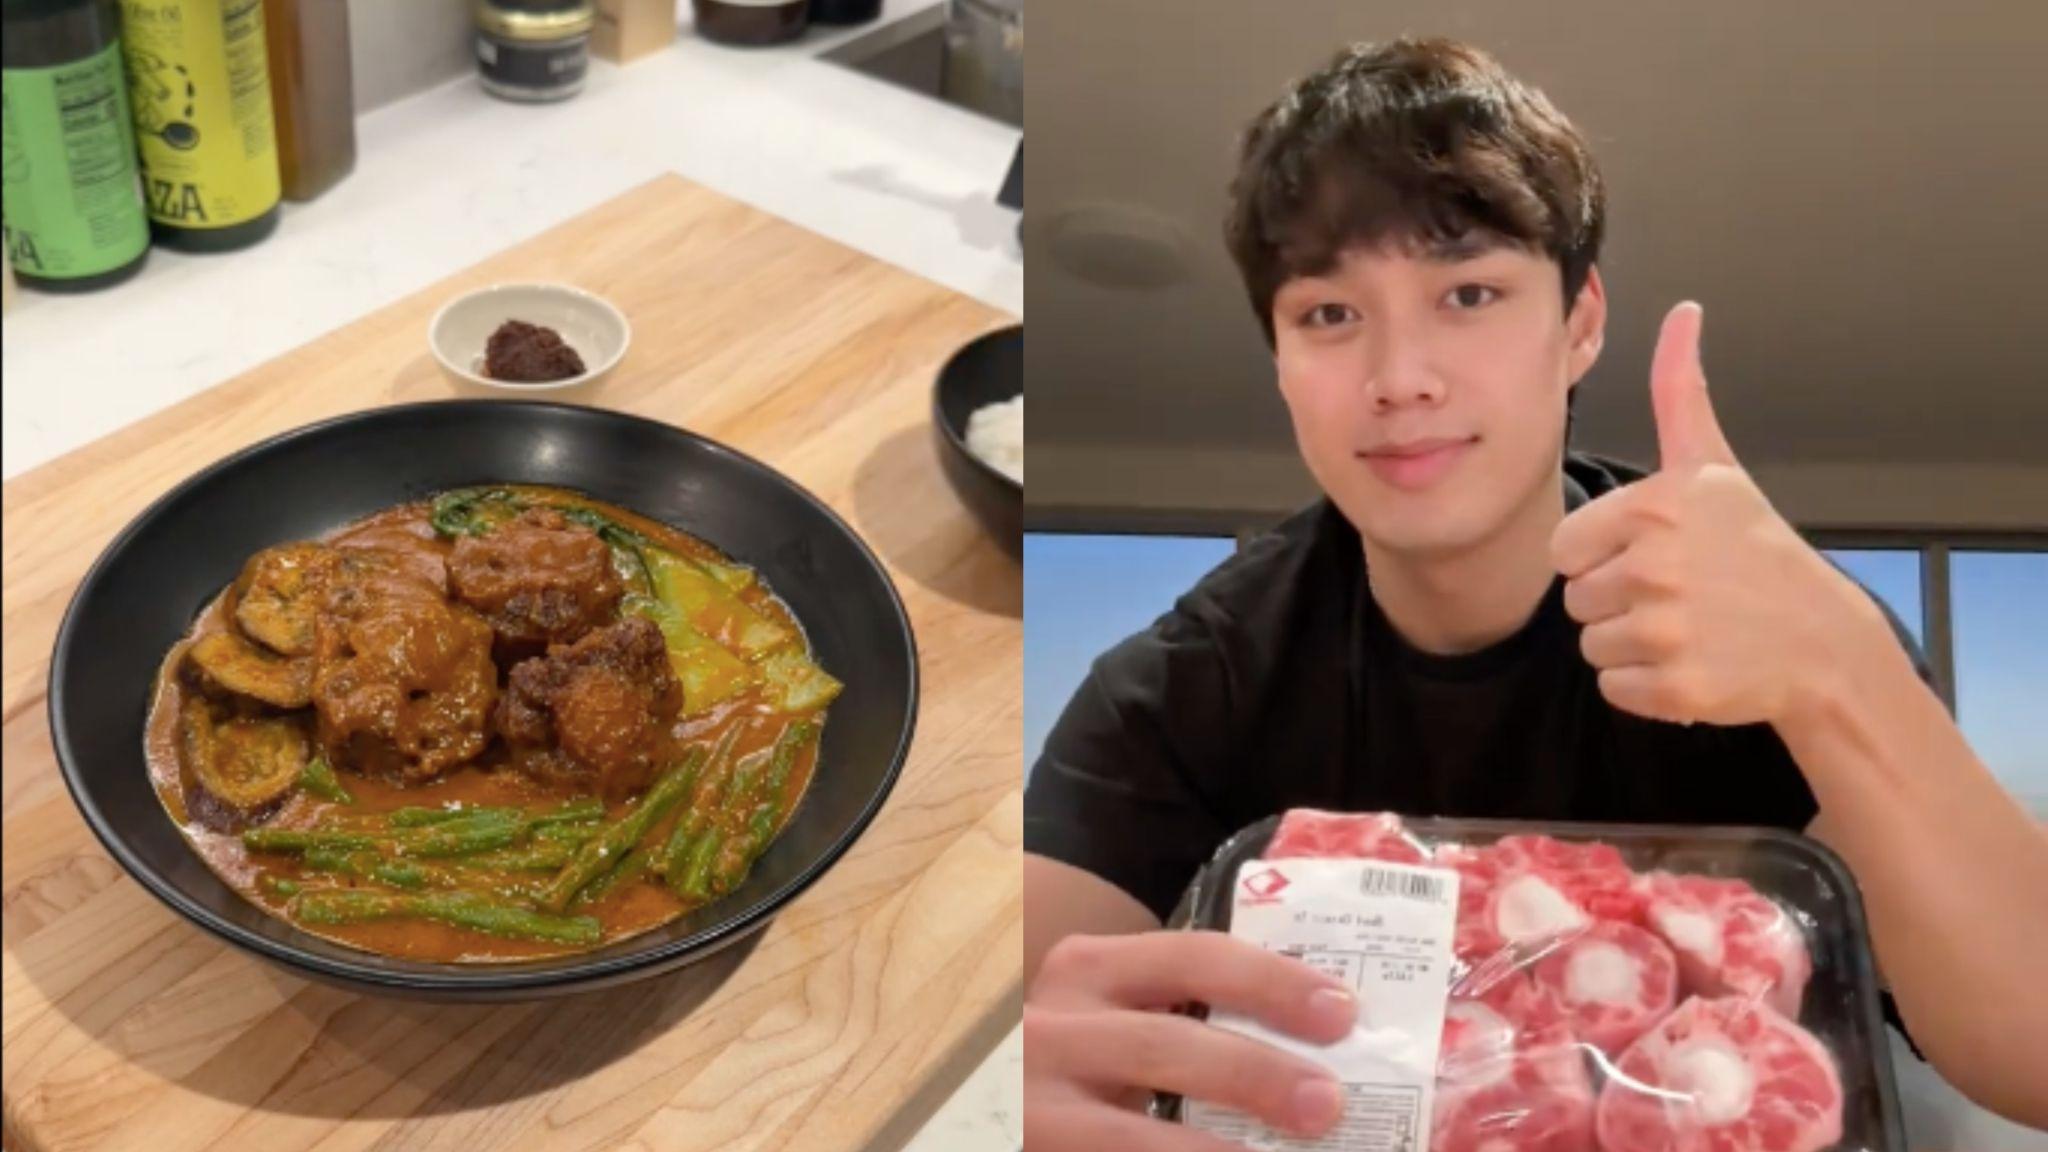 FoodToker Newt tries making kare-kare: ‘I’m ready to be cooked in the comments’ 